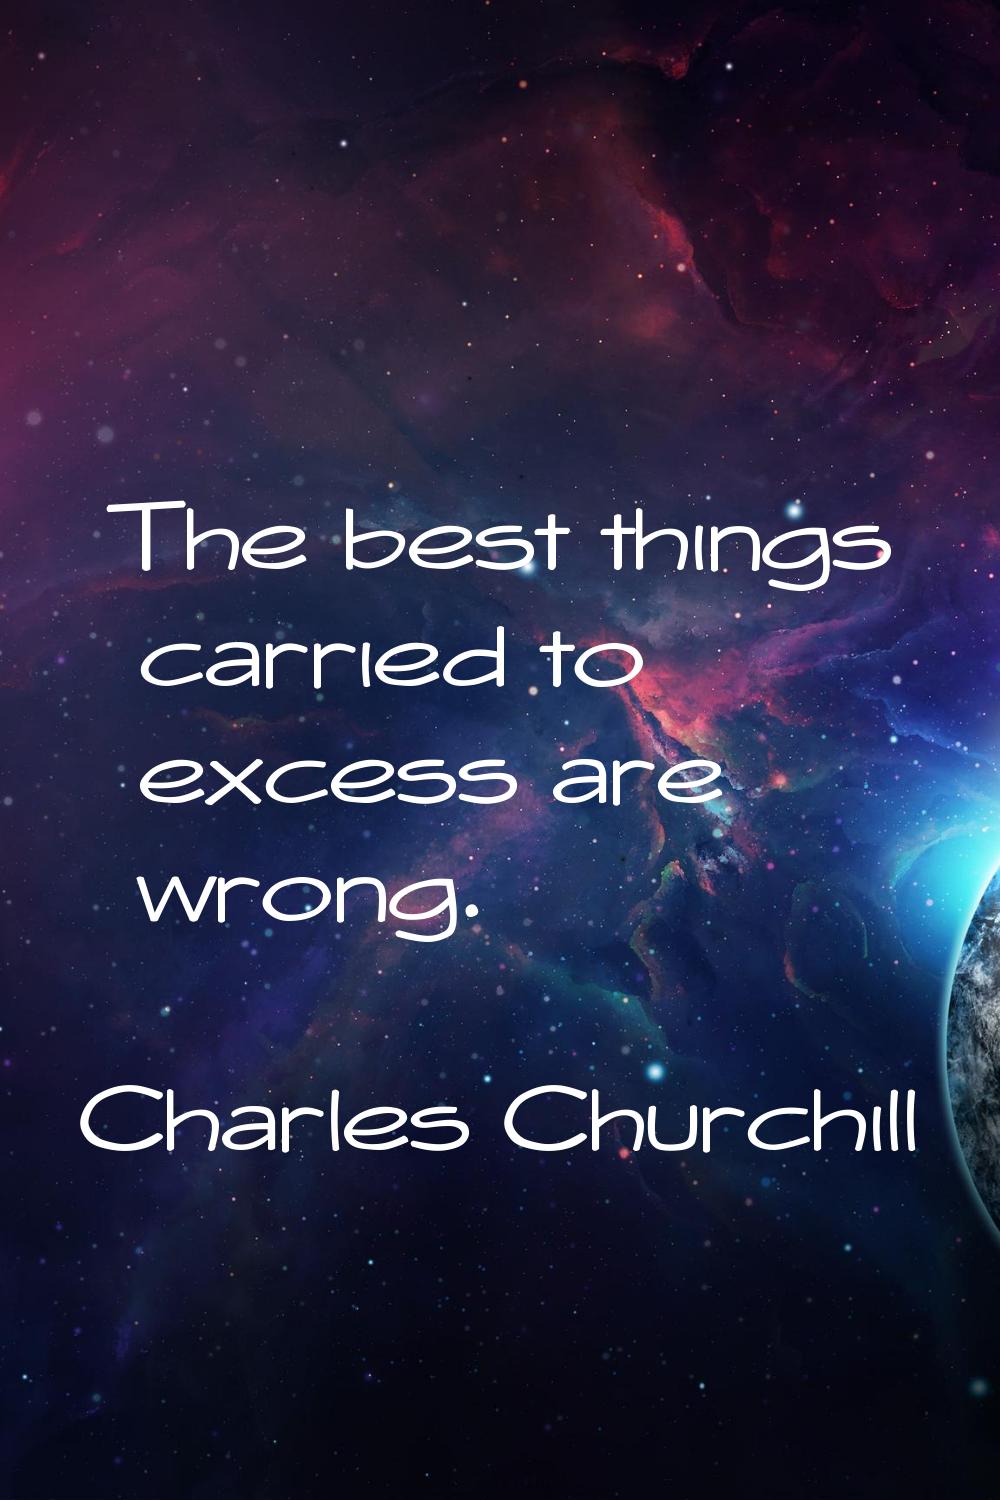 The best things carried to excess are wrong.